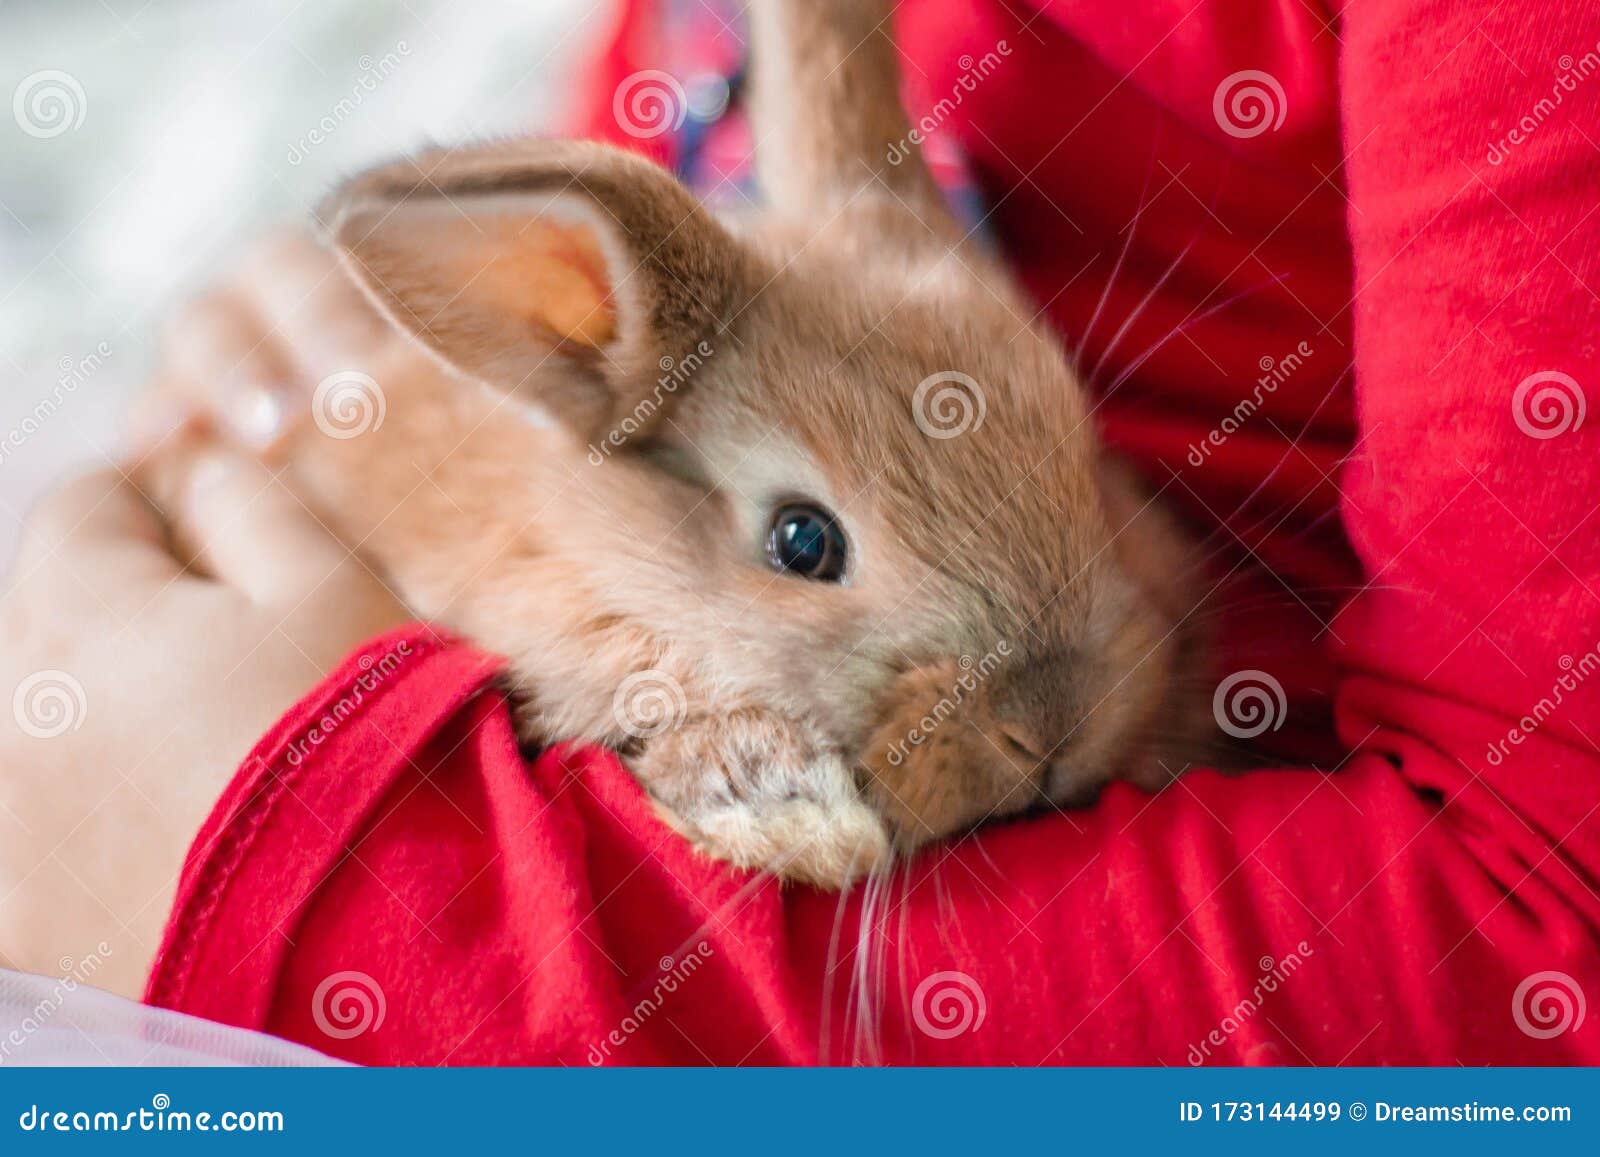 Rabbit Fluffy Animal Rabbit for the Magazine Stock Image - Image of  numbering, rodents: 173144499